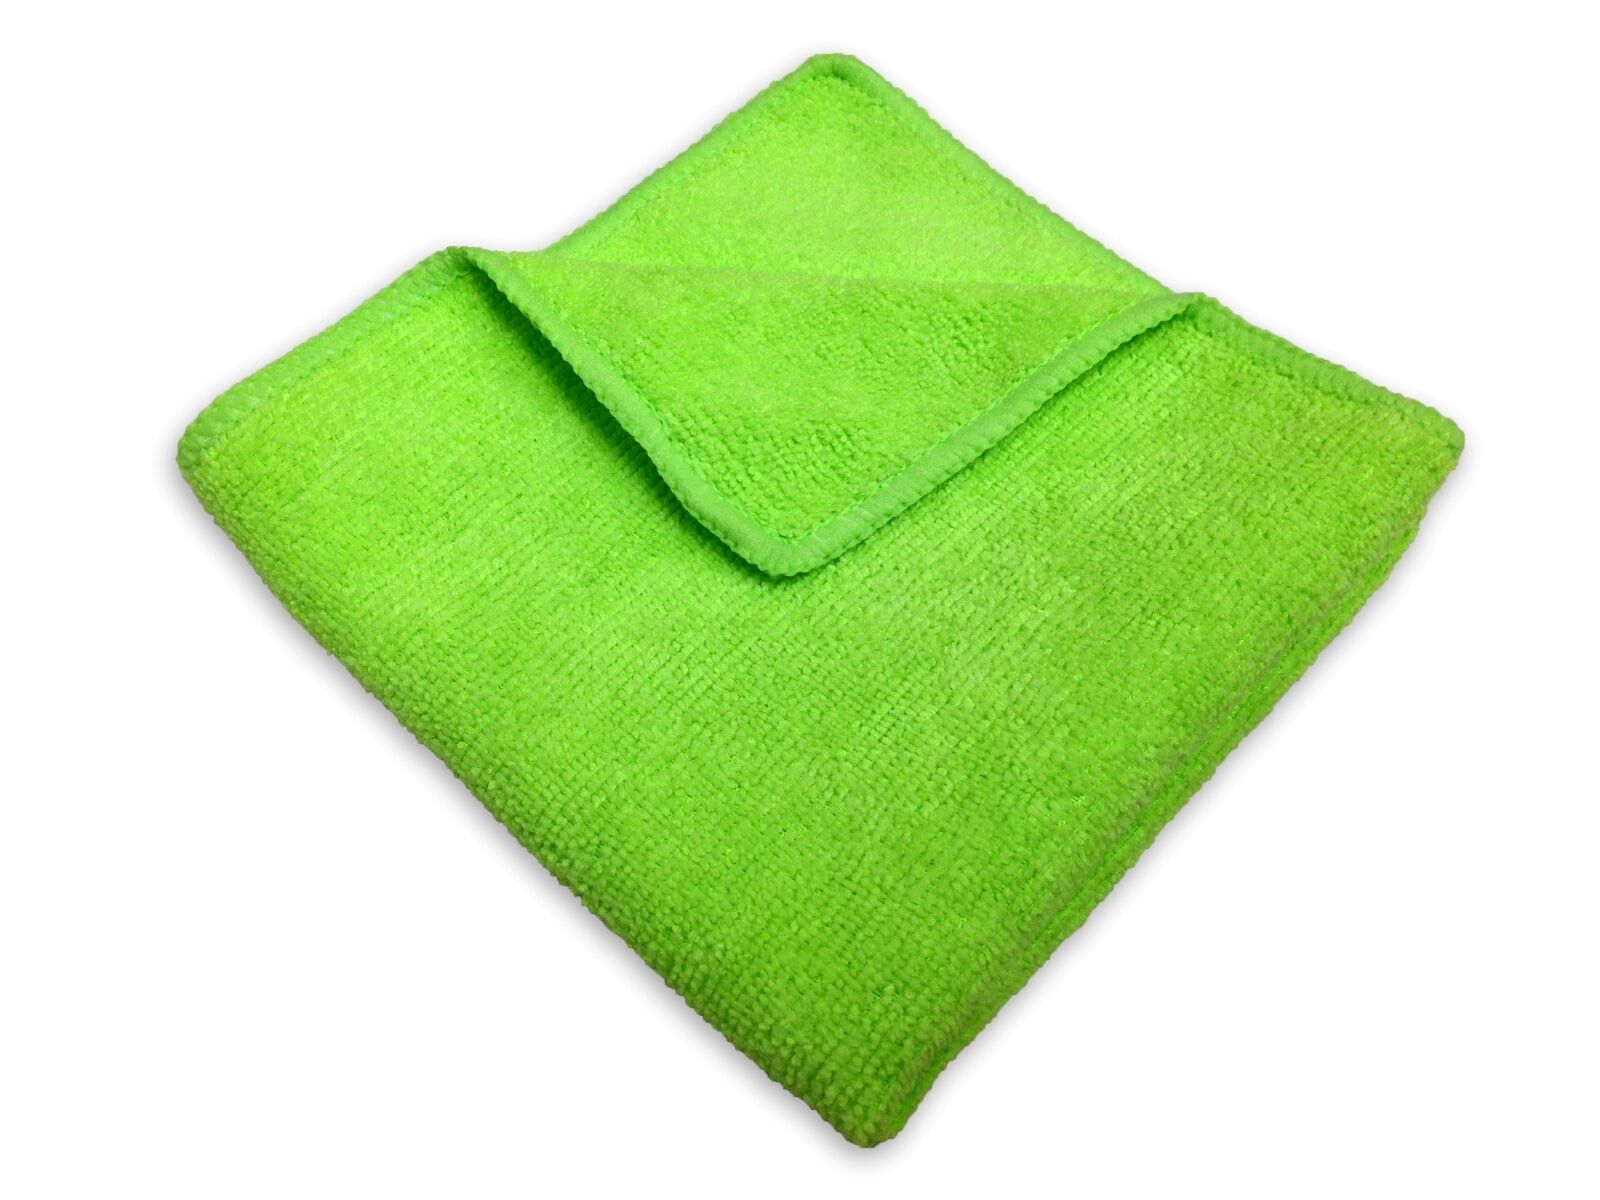  GTF Microfibre Car Cleaning Cloths, 16'' x 24'' Large  Microfibre Car Cloth Double-Side Plush & Super Absorbent Cars Cleaning  Towel for Home Polishing Washing and Detailing (6 Pack) : Automotive